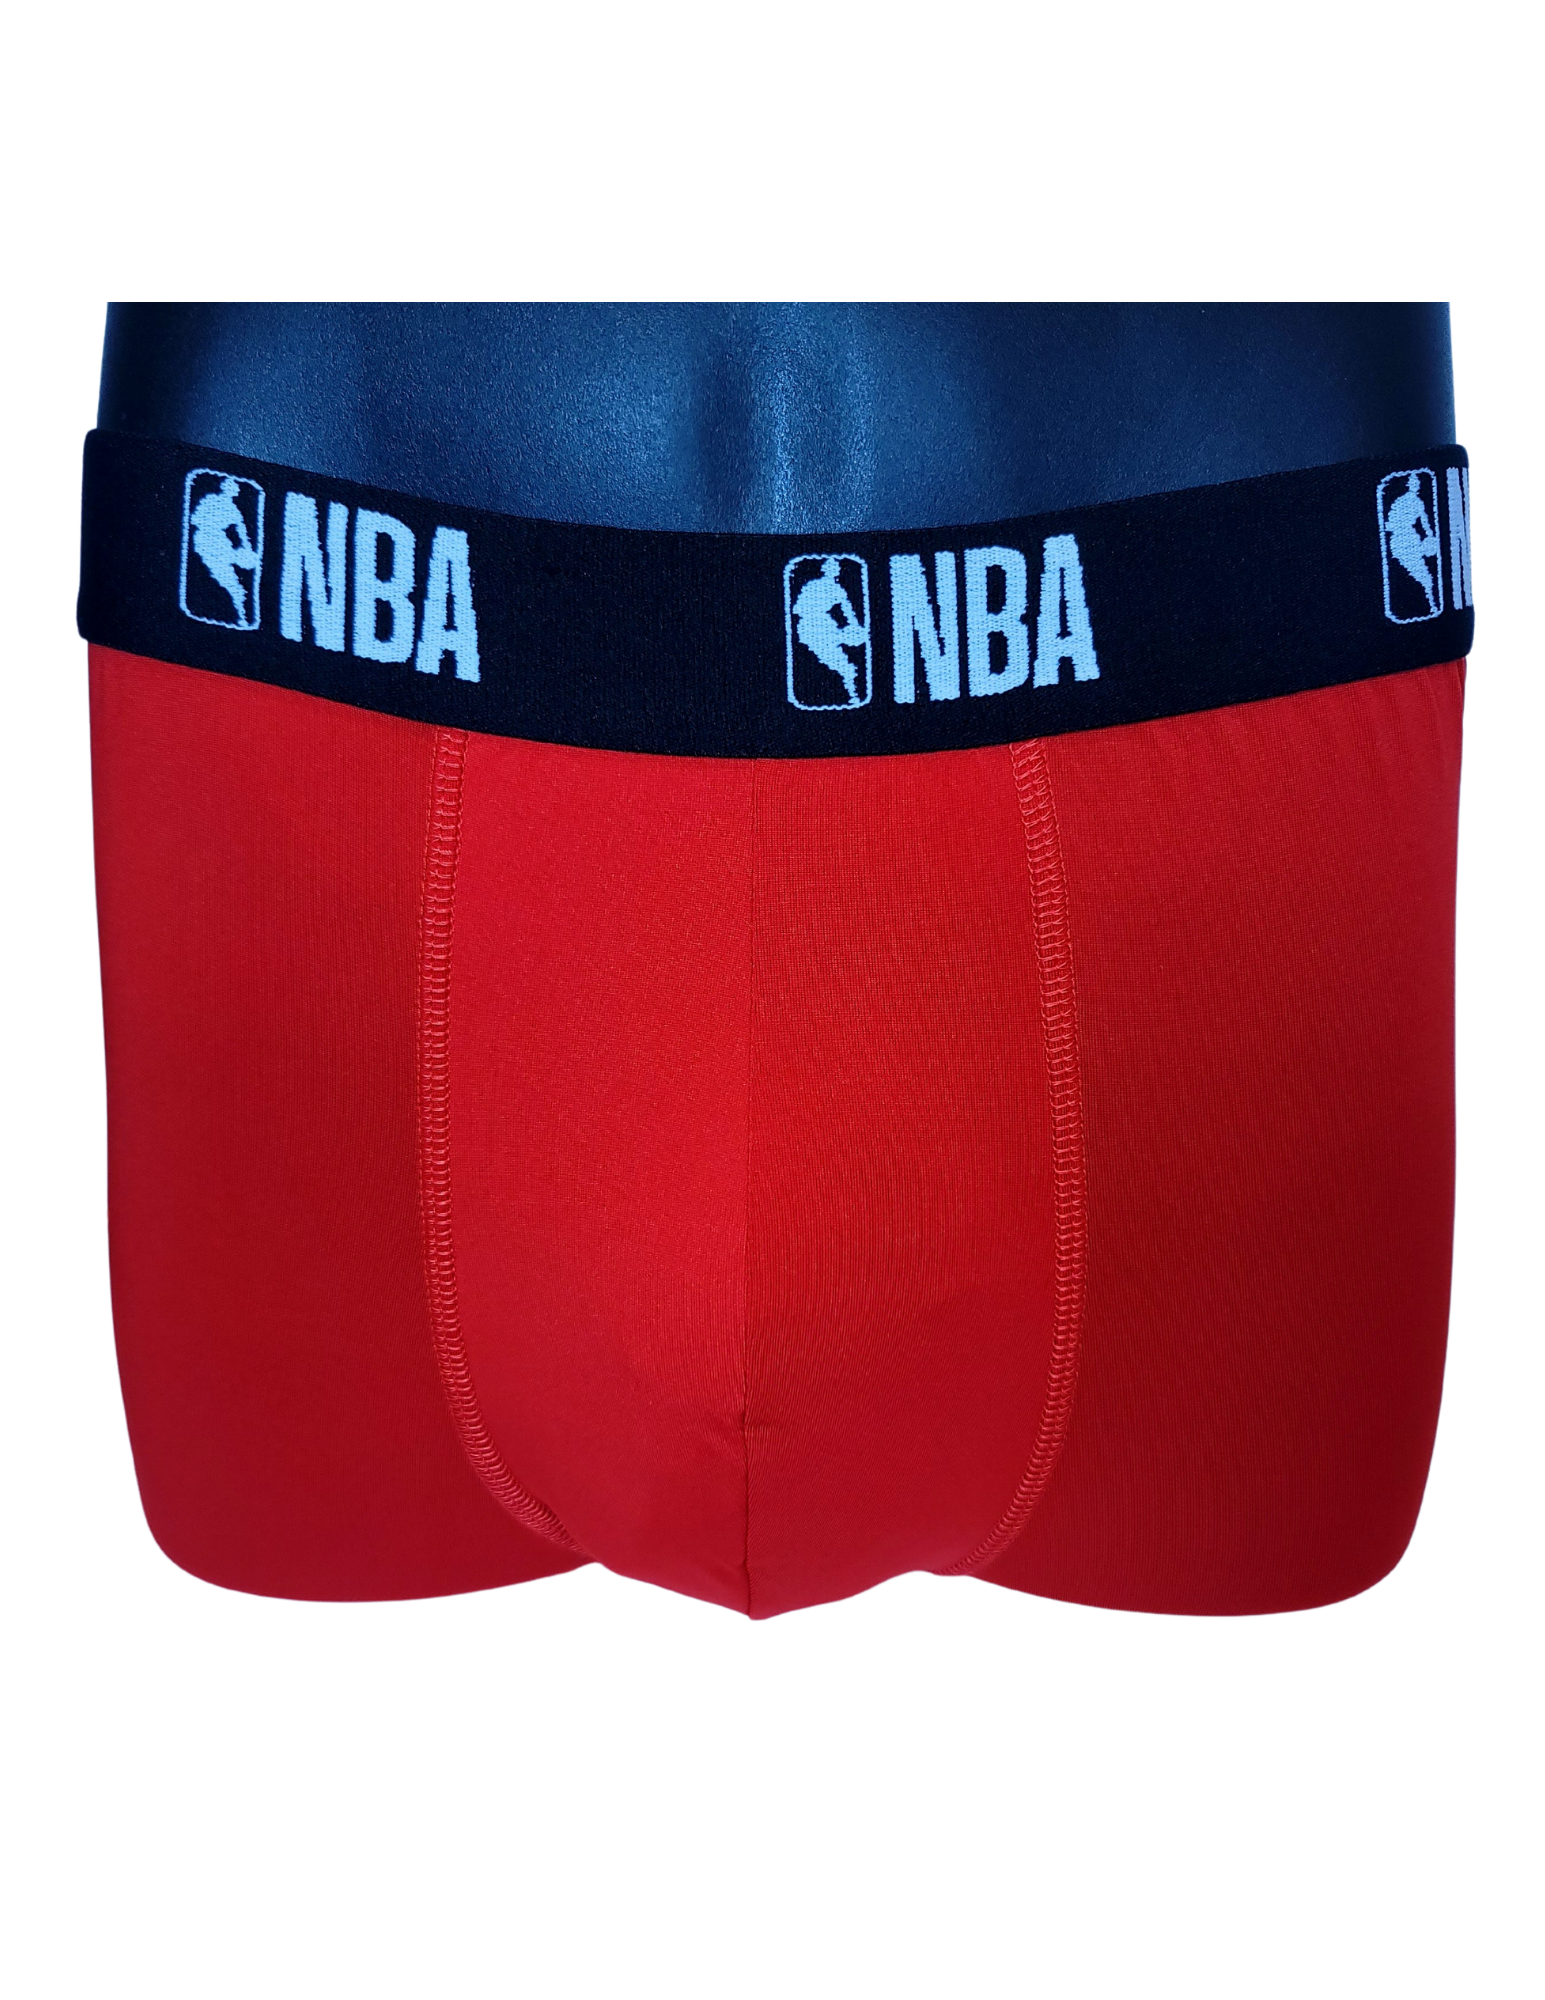 PSD Underwear NBA Mens Red Roses with Checkers Vietnam